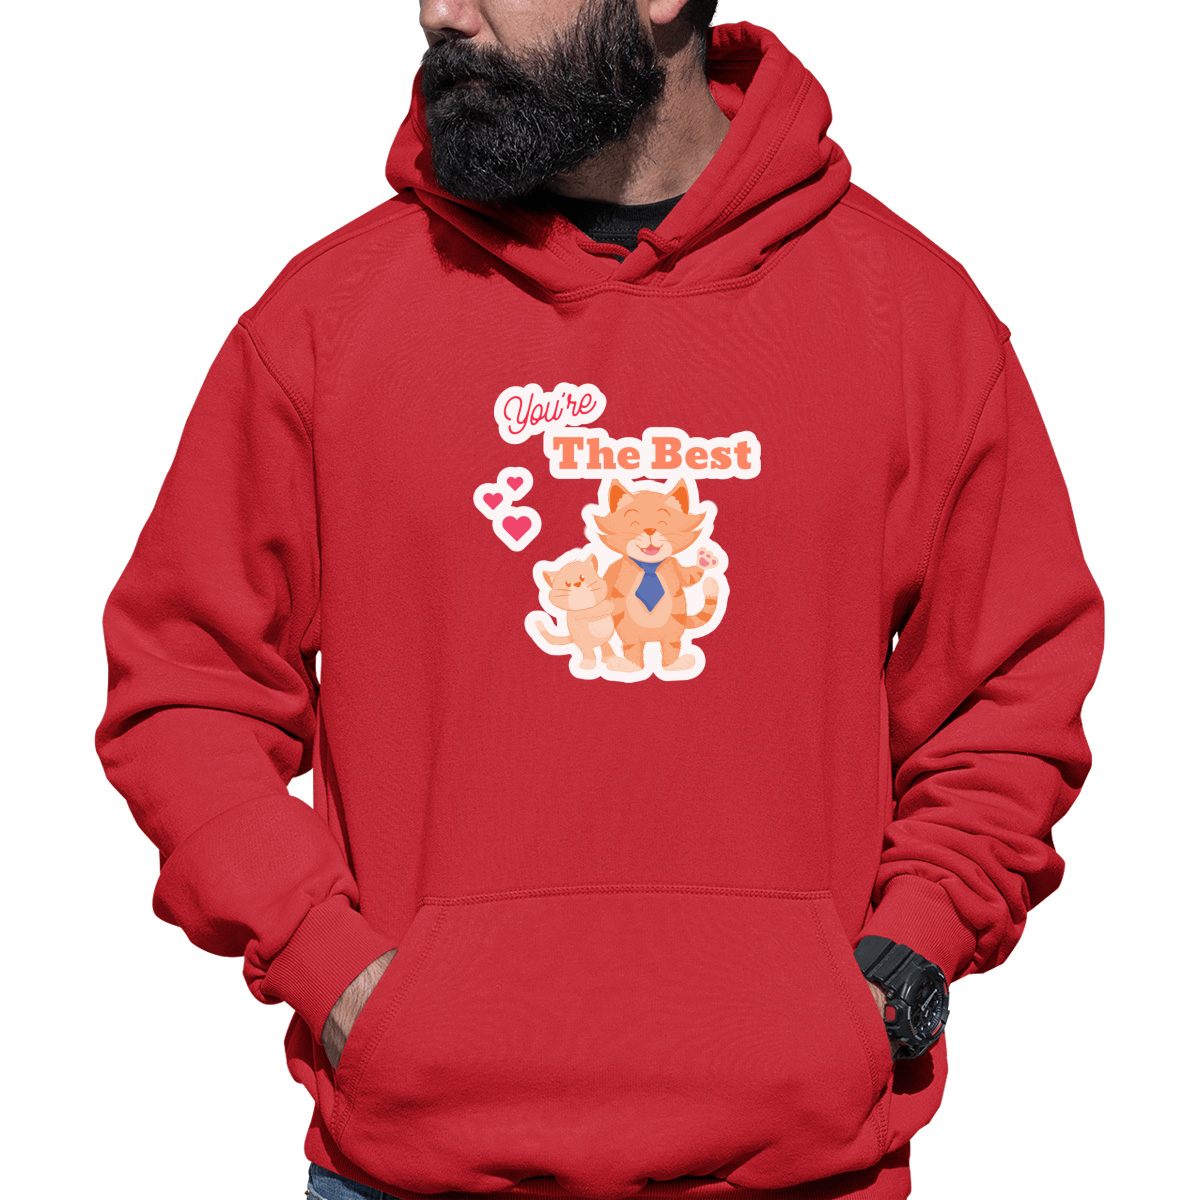 You are the best Unisex Hoodie | Red